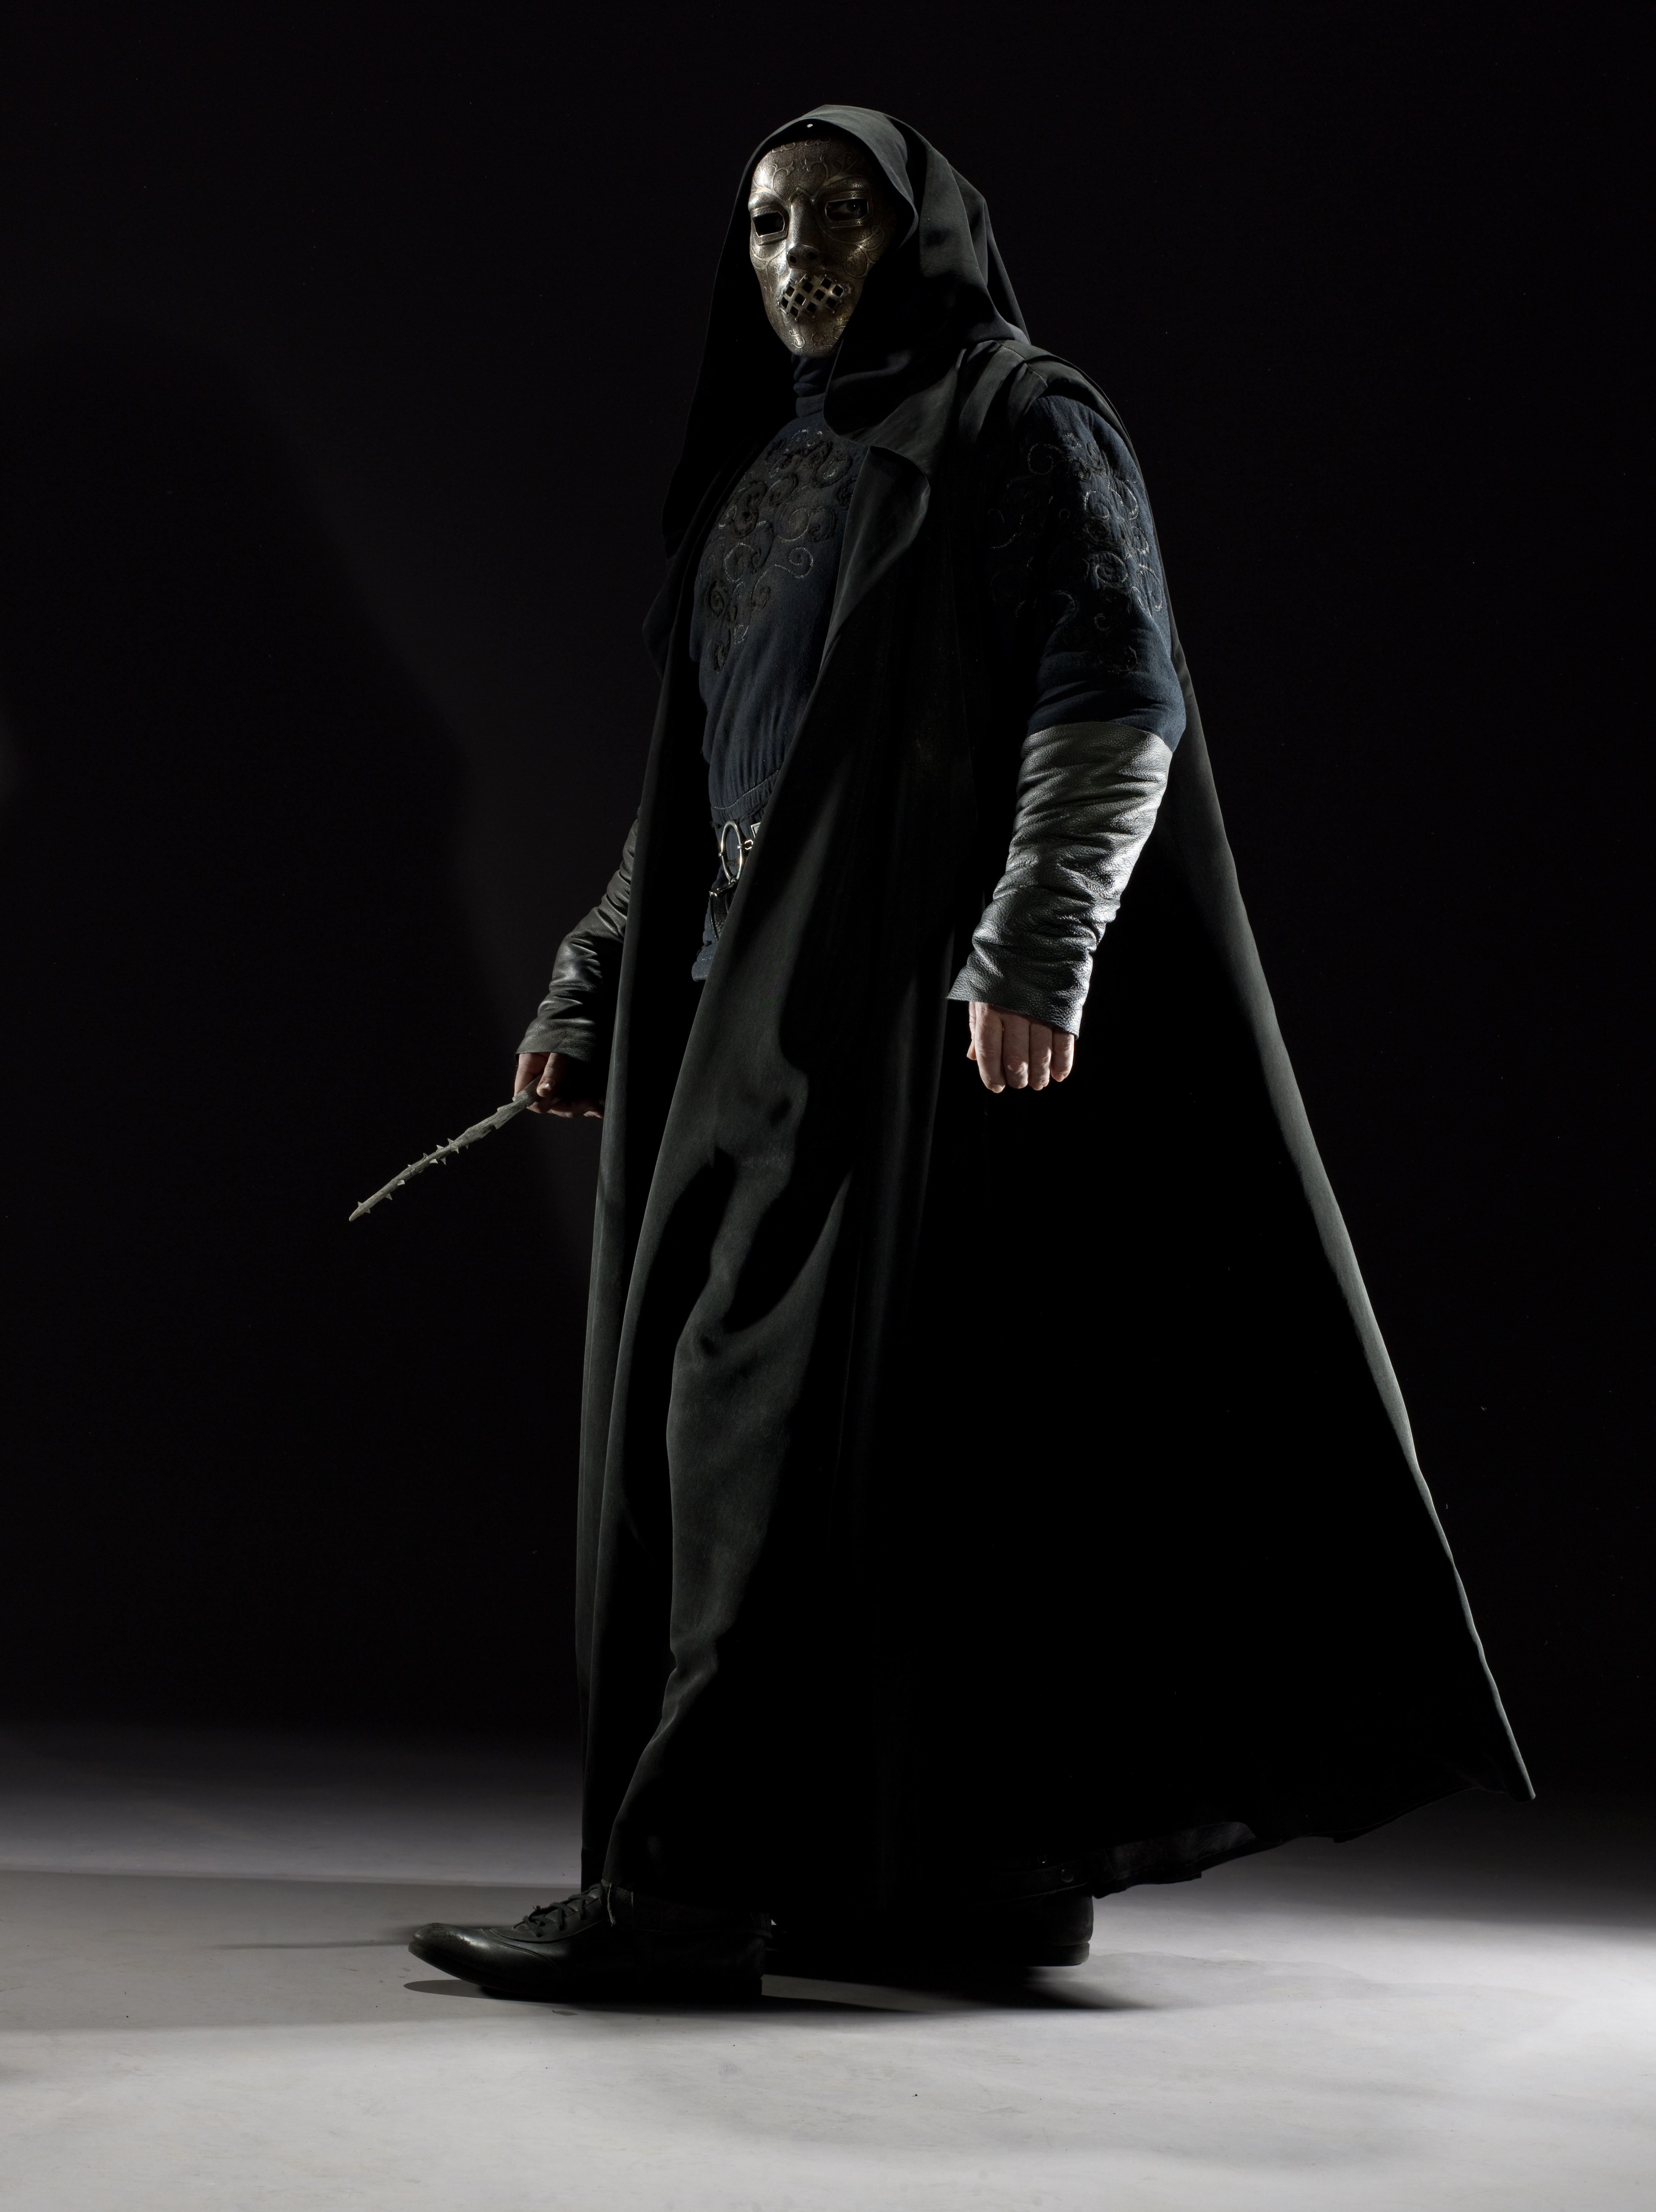 Me as a Death Eater. Great times on set.